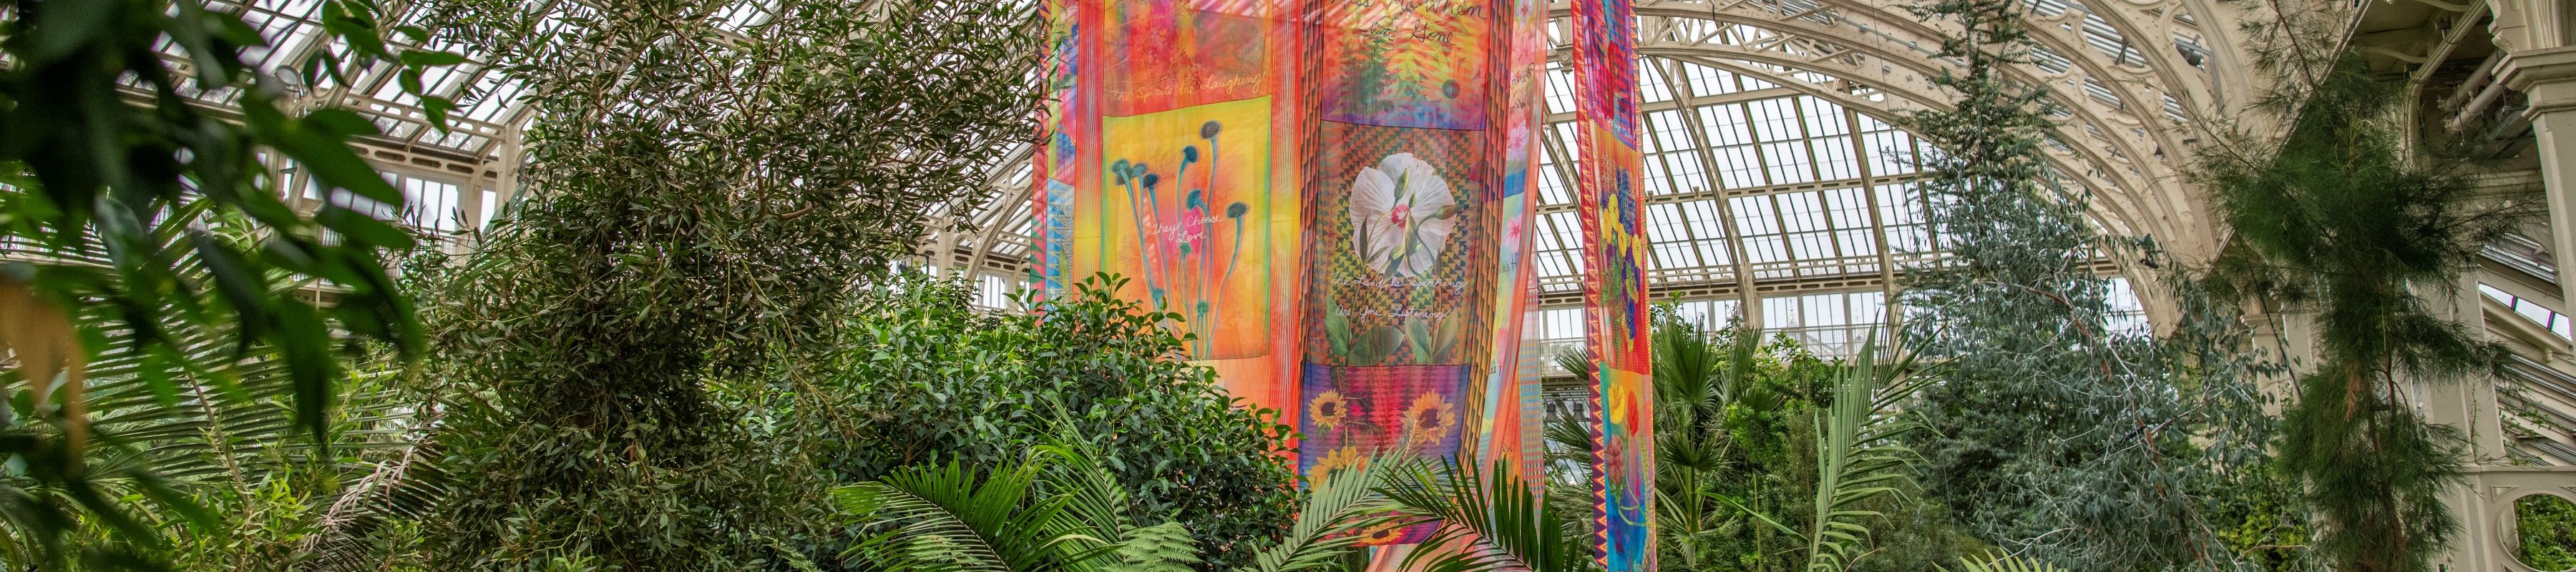 A large colourful hanging banner in a Victorian greenhouse full of green plants